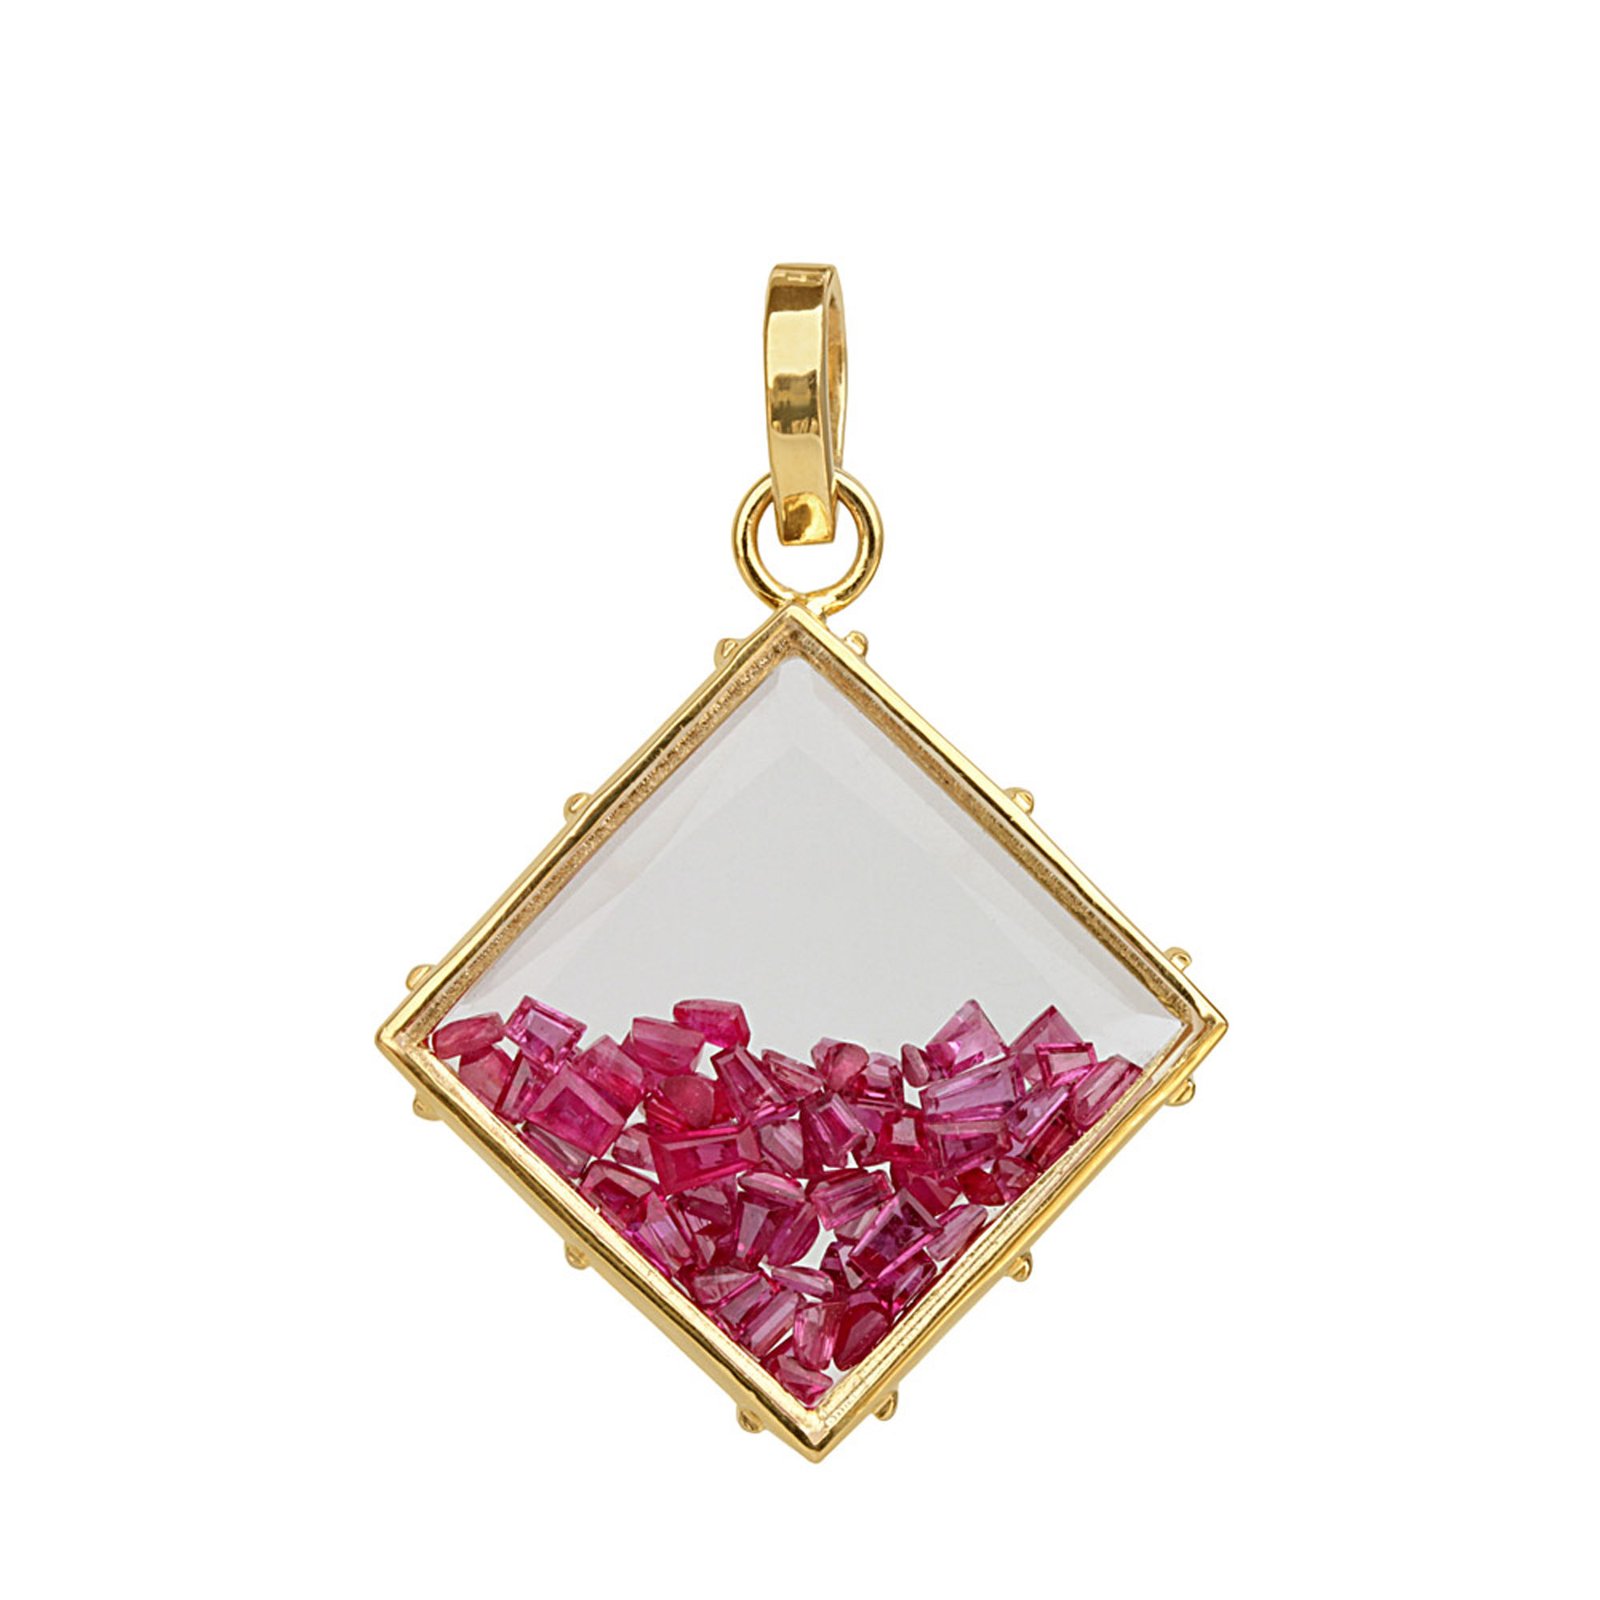 18k solid gold crystal shaker pendant with loose ruby